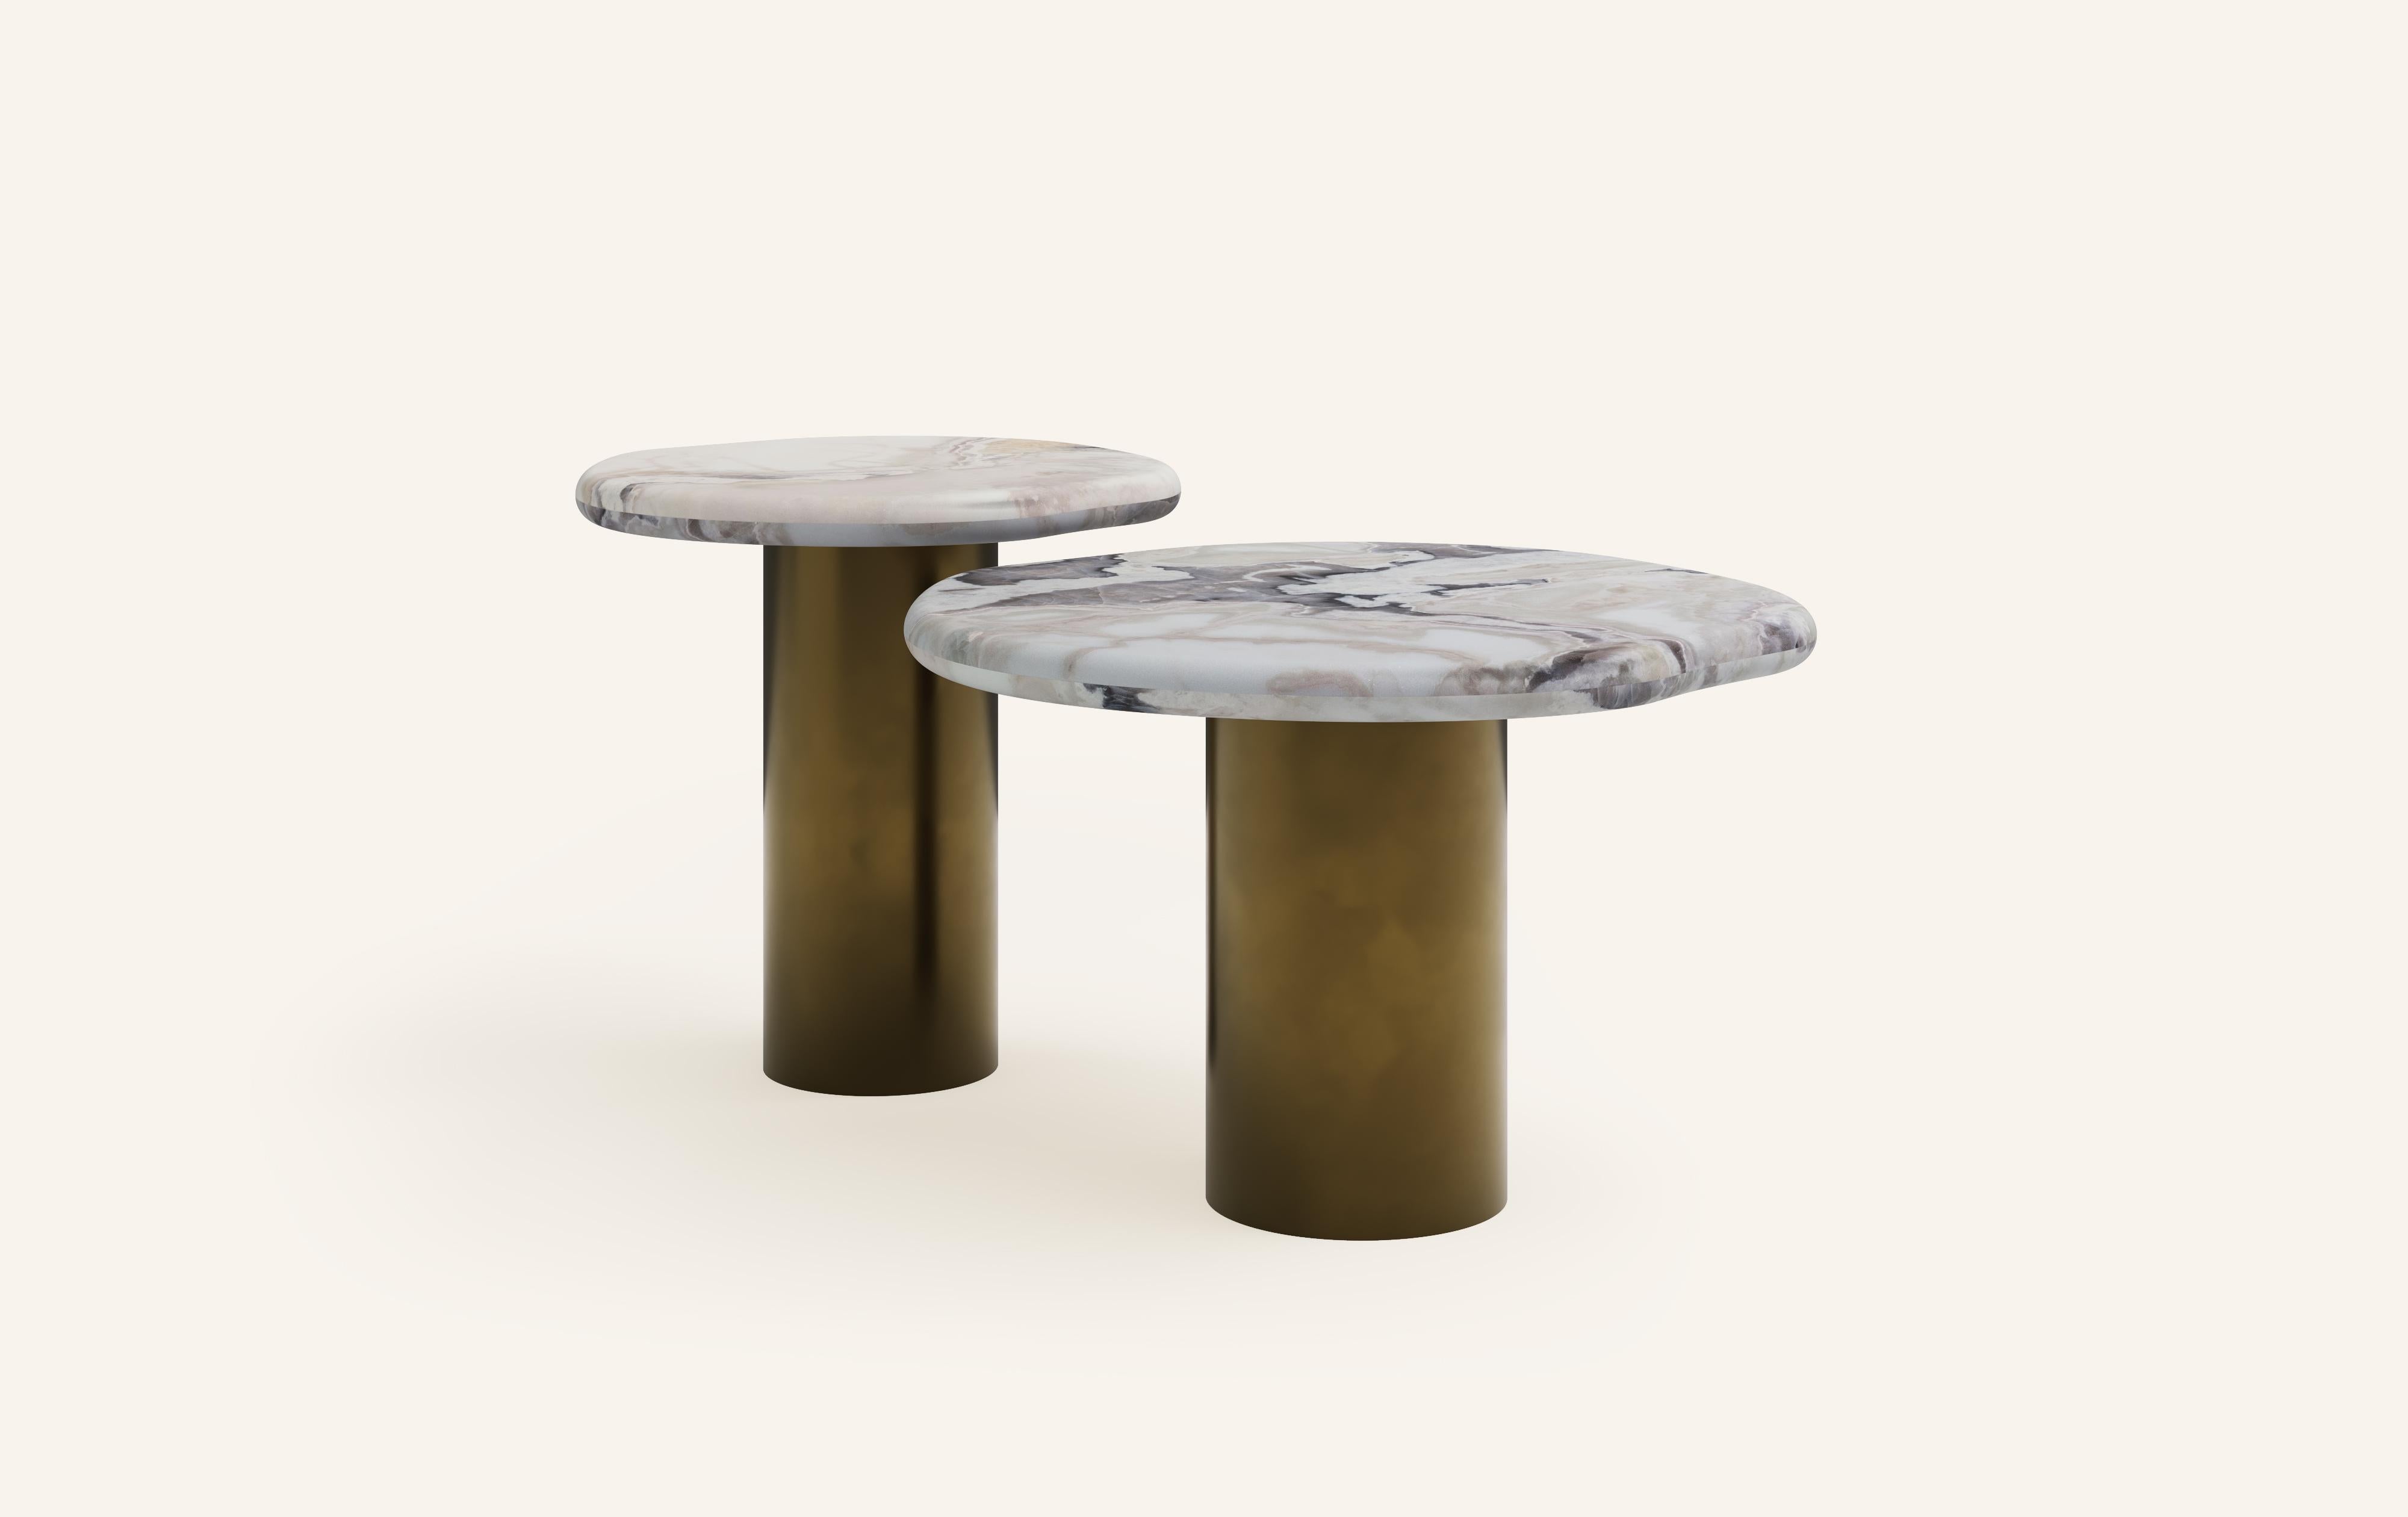 ‘LAGO’, ITALIAN FOR ‘LAKE’, HAS INSPIRED A FORM DERIVED FROM NATURE, TEXTURED WITH LUXURIOUS STONES AND METALS. THE COLLECTION ENCOURAGES NESTING AND LAYERING IN ITS AVAILABLE FORMS.

DIMENSIONS: (SIDE TABLES SOLD INDIVIDUALLY): 
18”L x 18”W x 18”H: